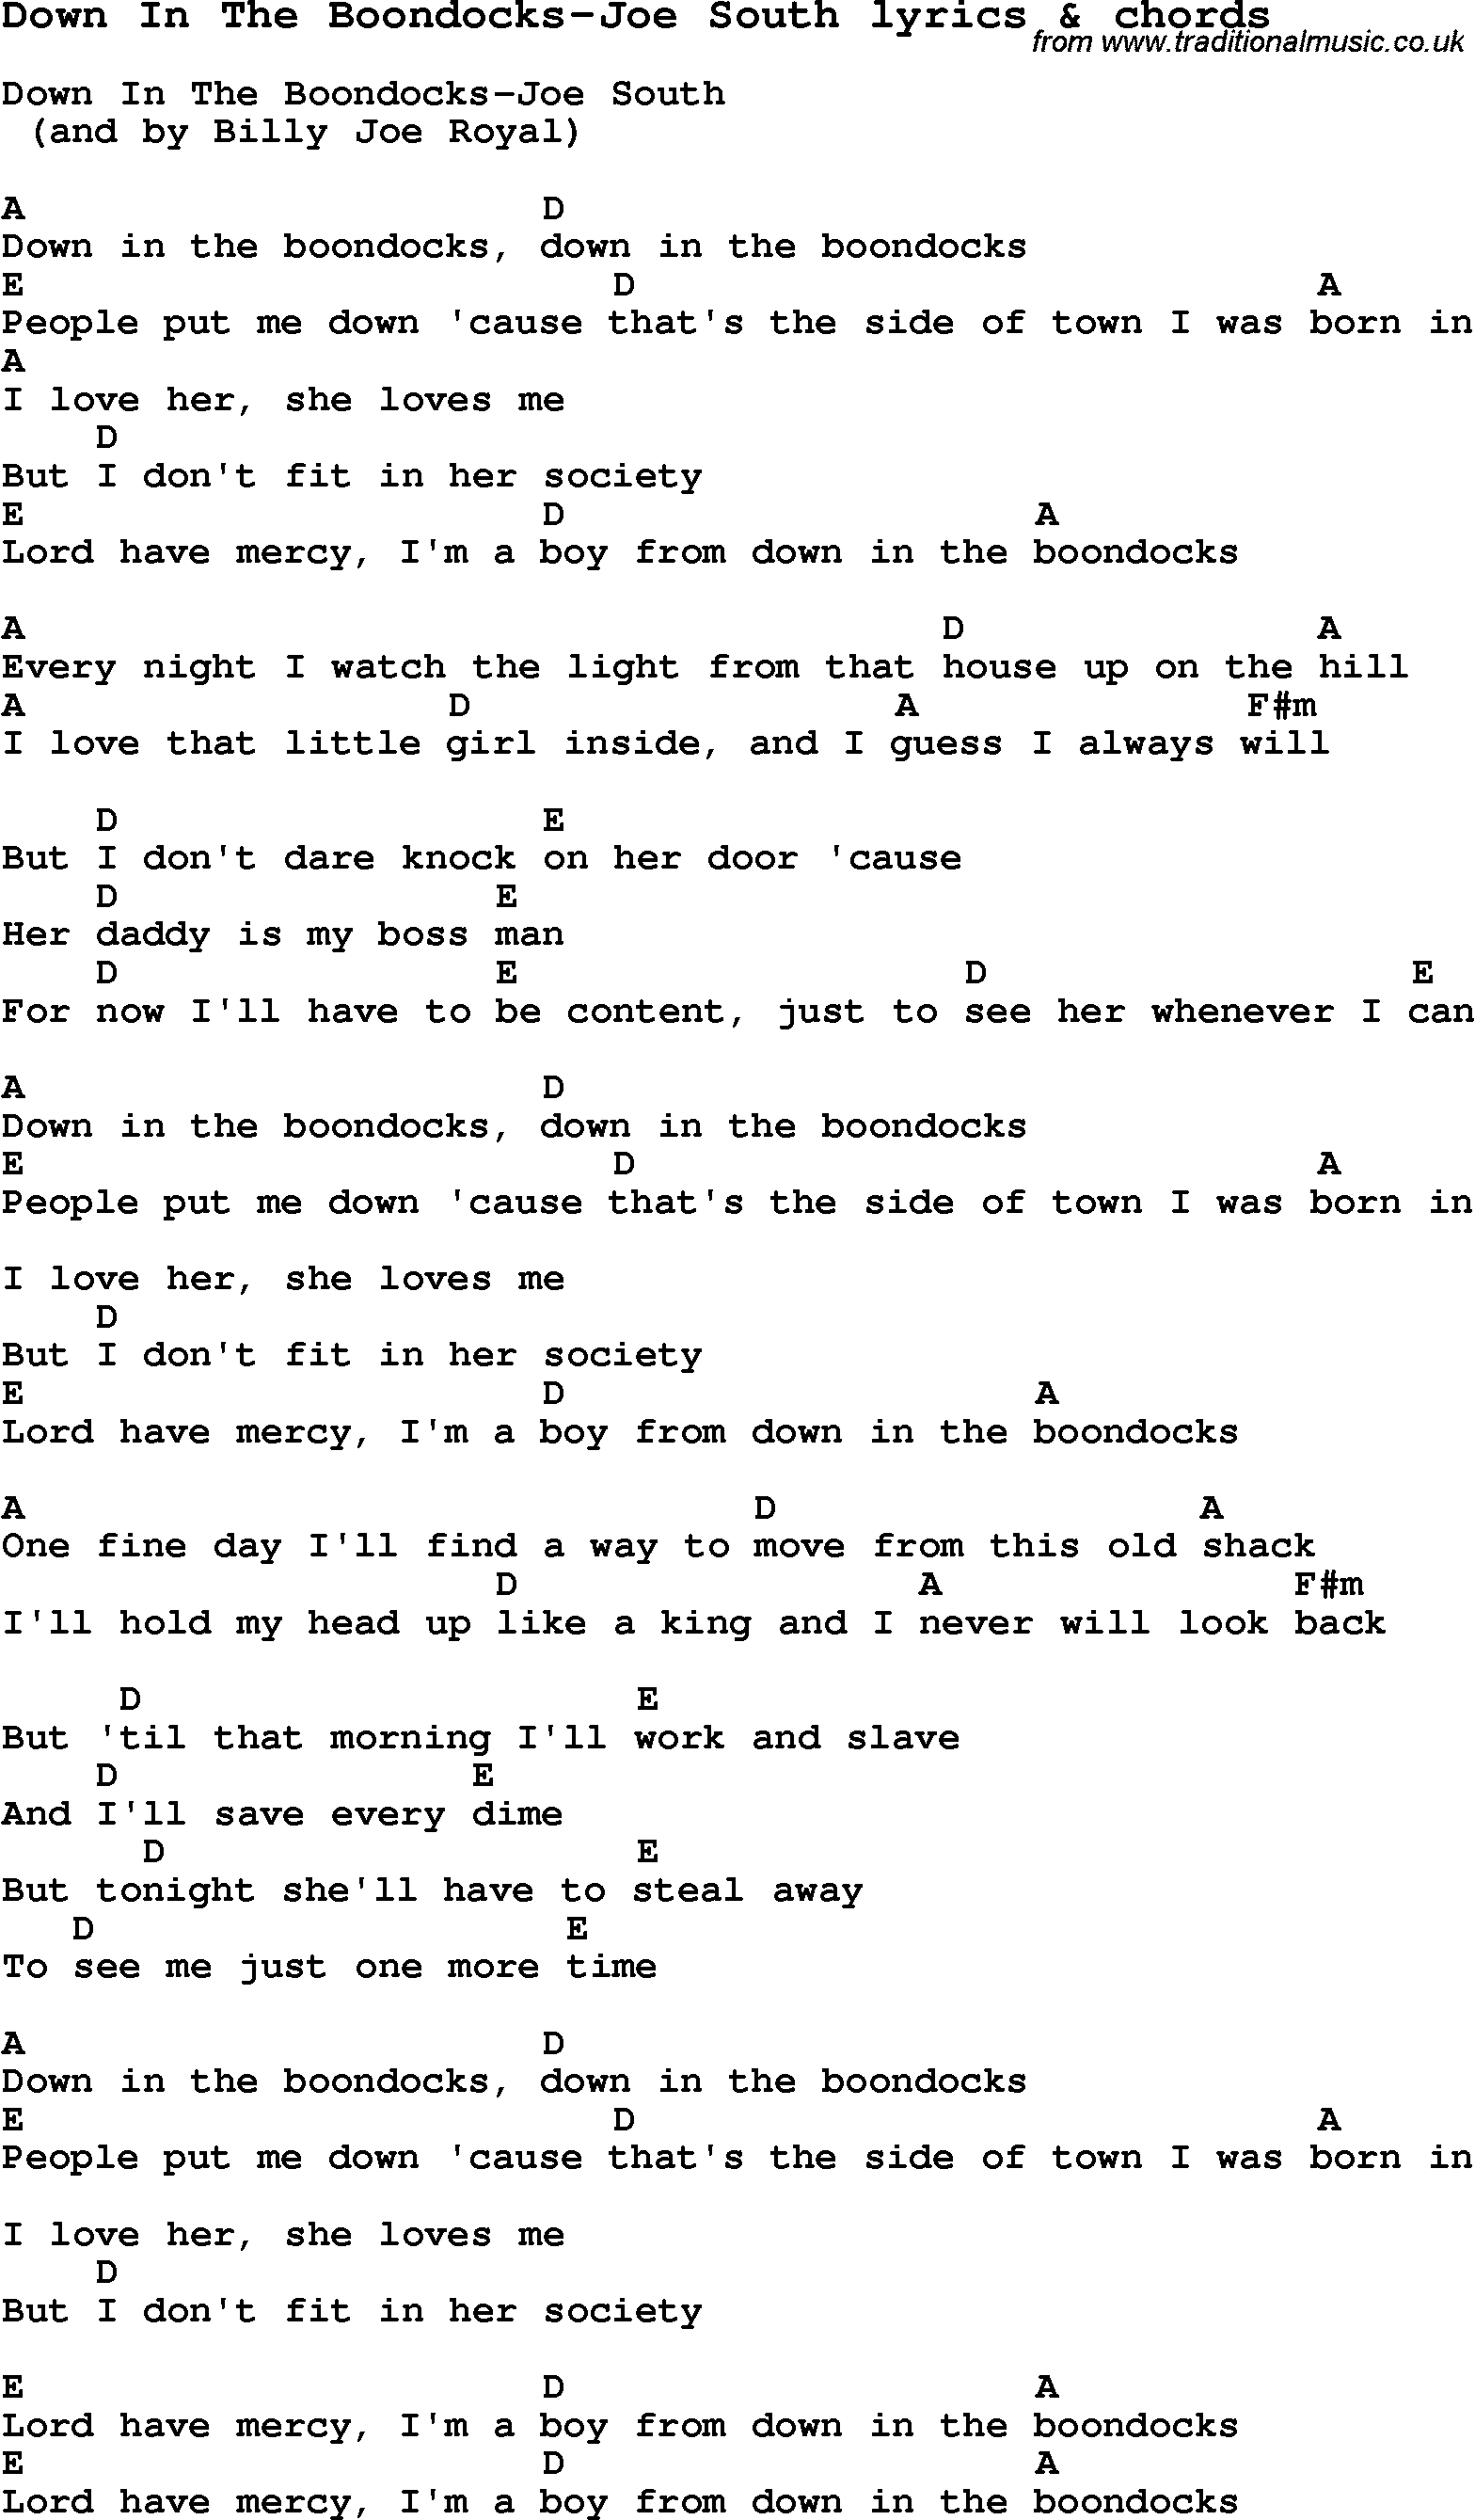 Love Song Lyrics for: Down In The Boondocks-Joe South with chords for Ukulele, Guitar Banjo etc.